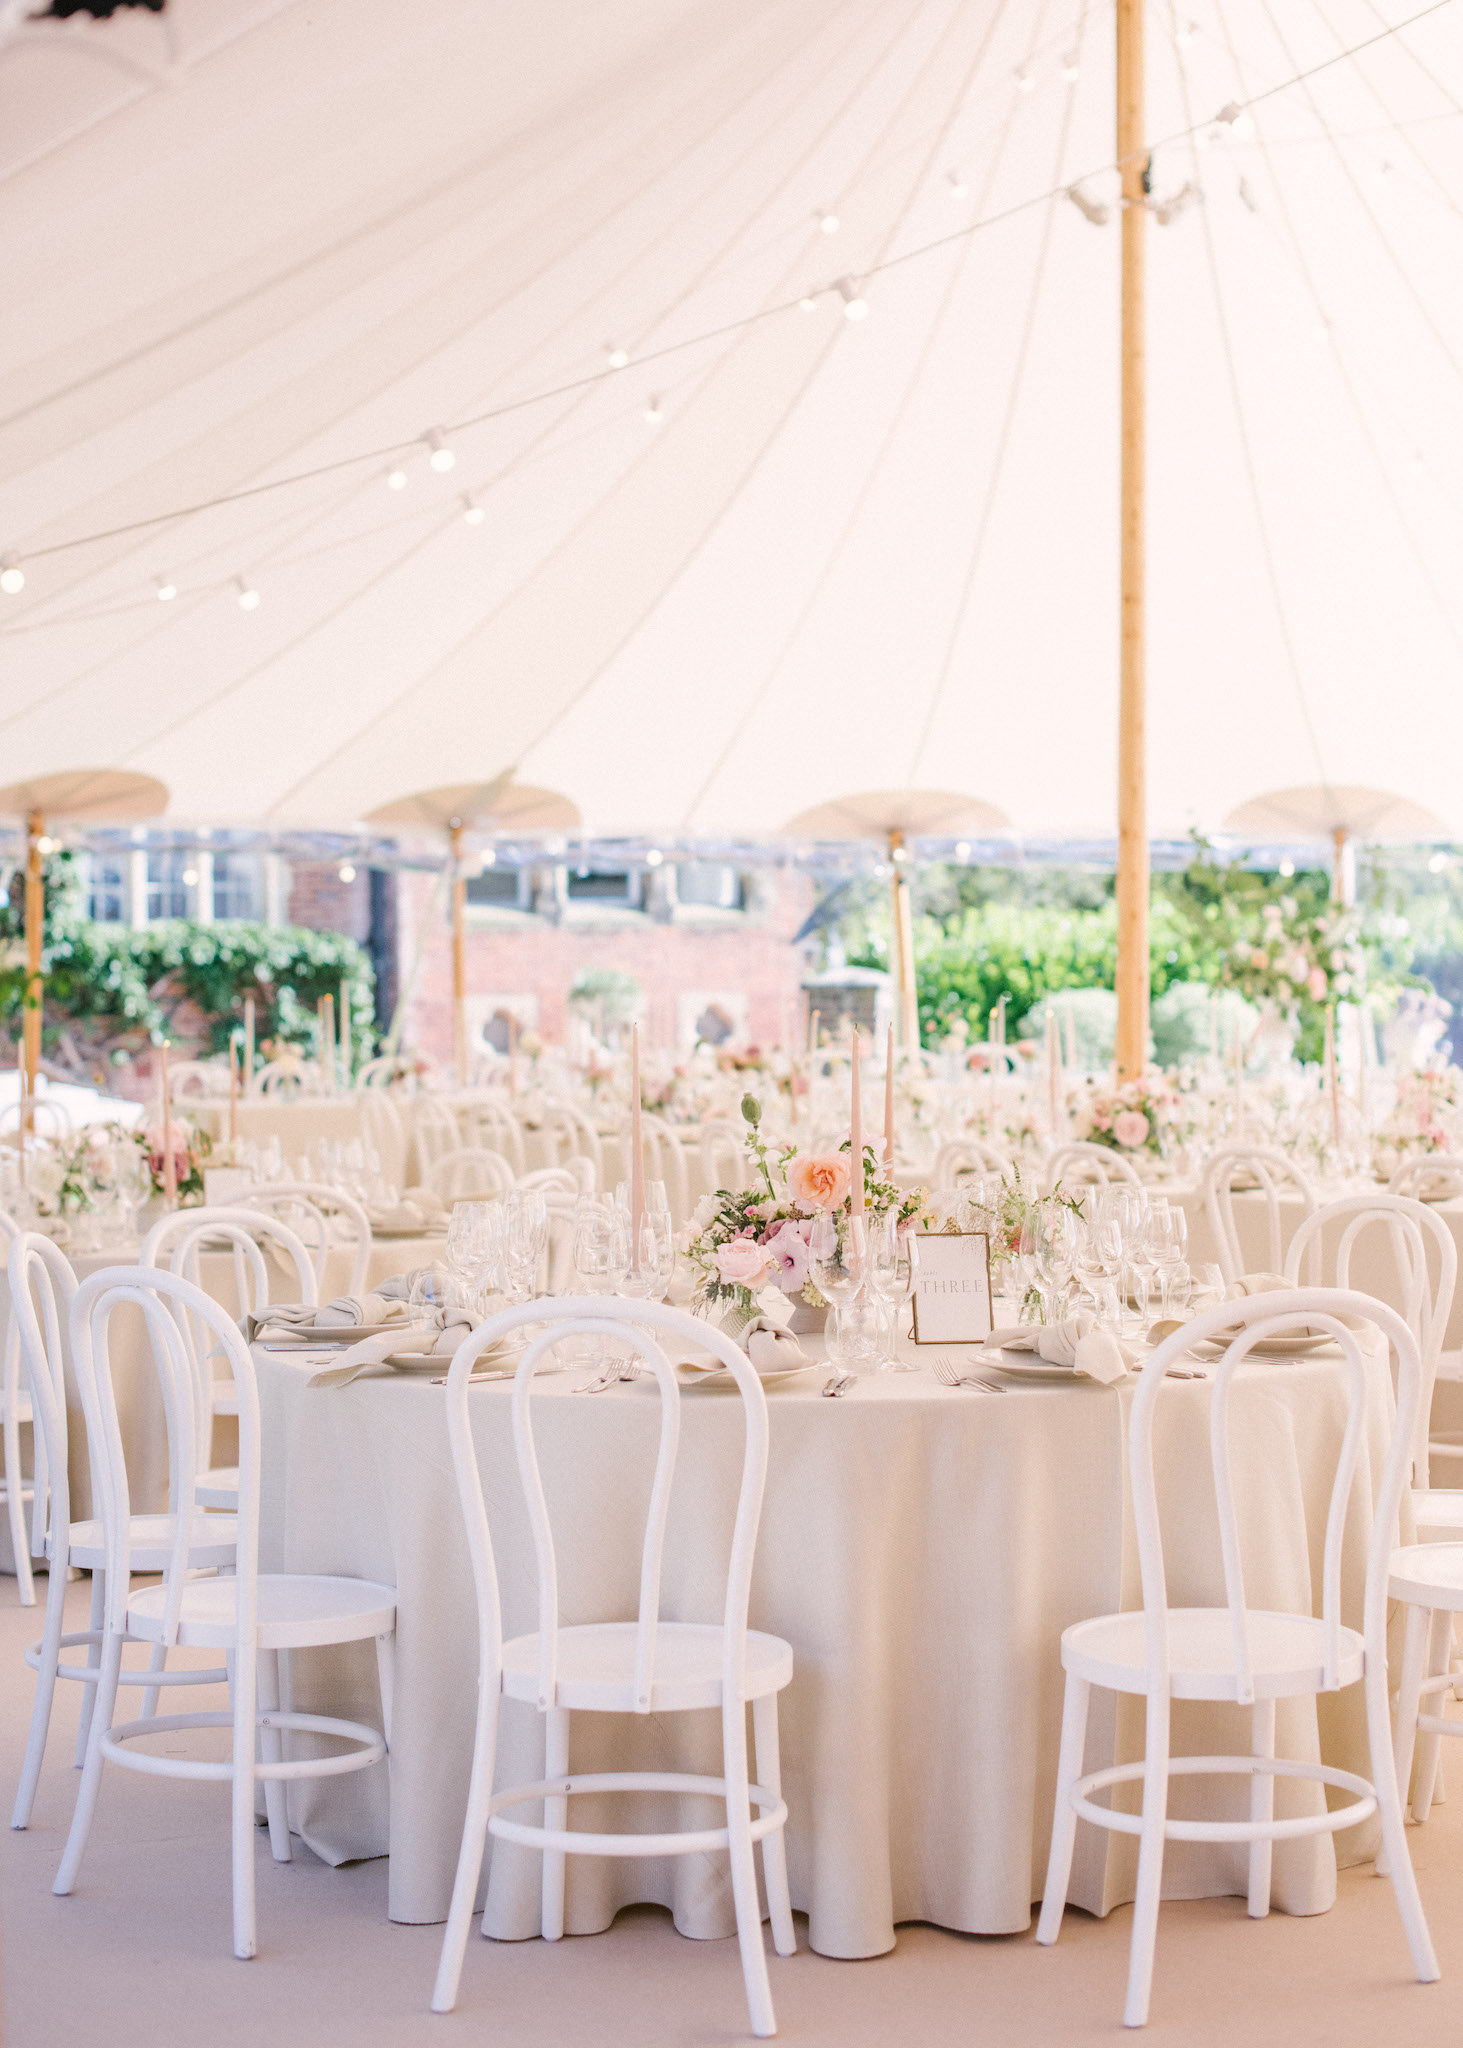 Planning an outdoor Sperry Wedding, Sperry Tent design decor by Katrina Otter Weddings, with Aelisabet Flowers & The Sail Tent Company